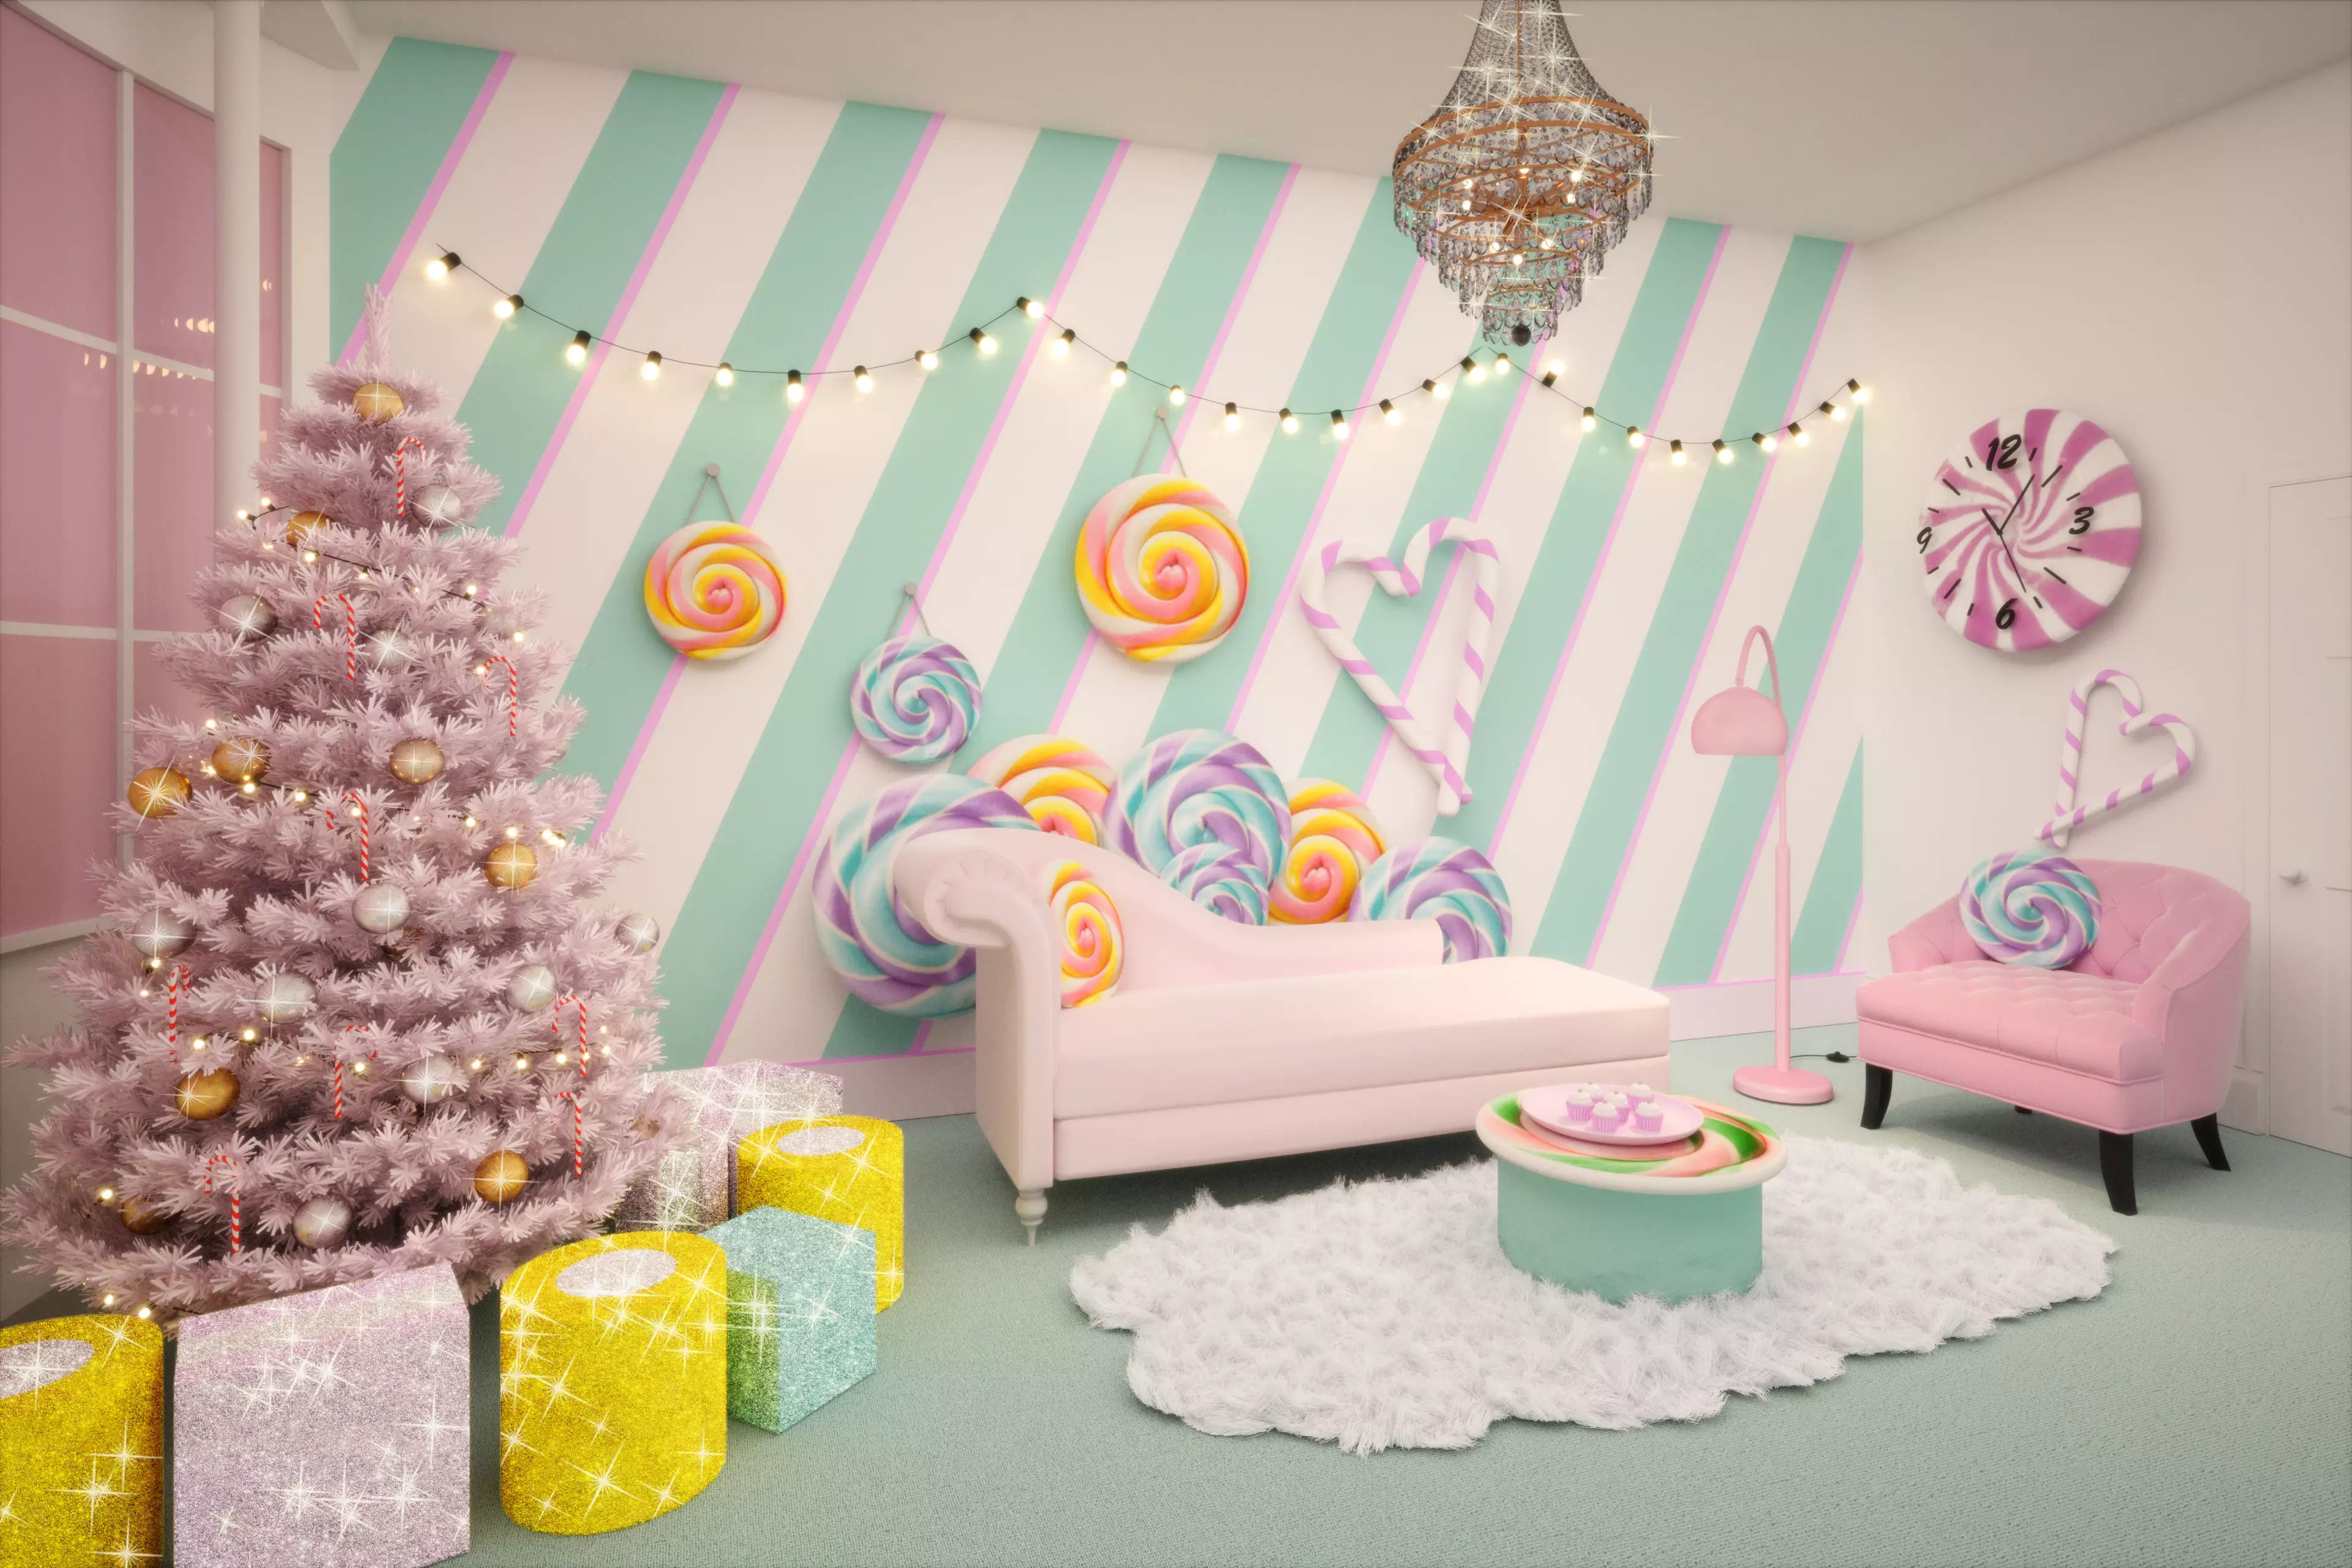 The Candy Lounge includes a candy Christmas tree (